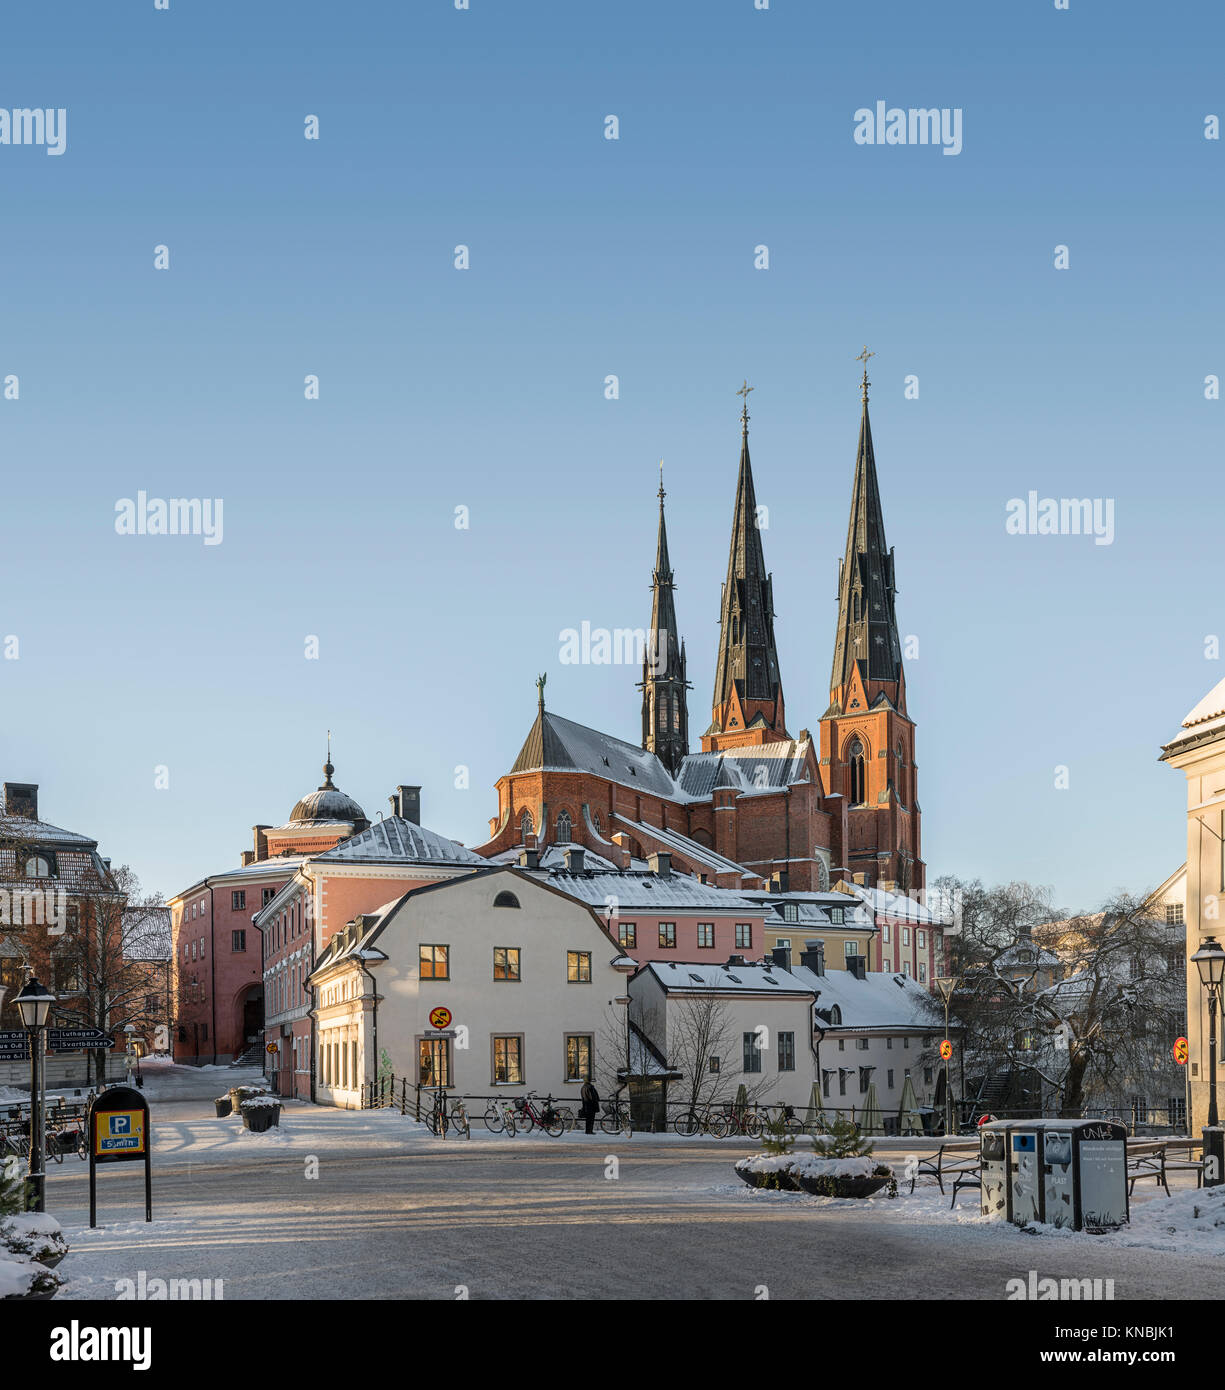 Gamla Torget  / Old Square and the Cathedral / Domkyrkan, the bridge Dombron over the Fyris river Uppsala, Sweden, Scandinavia Stock Photo